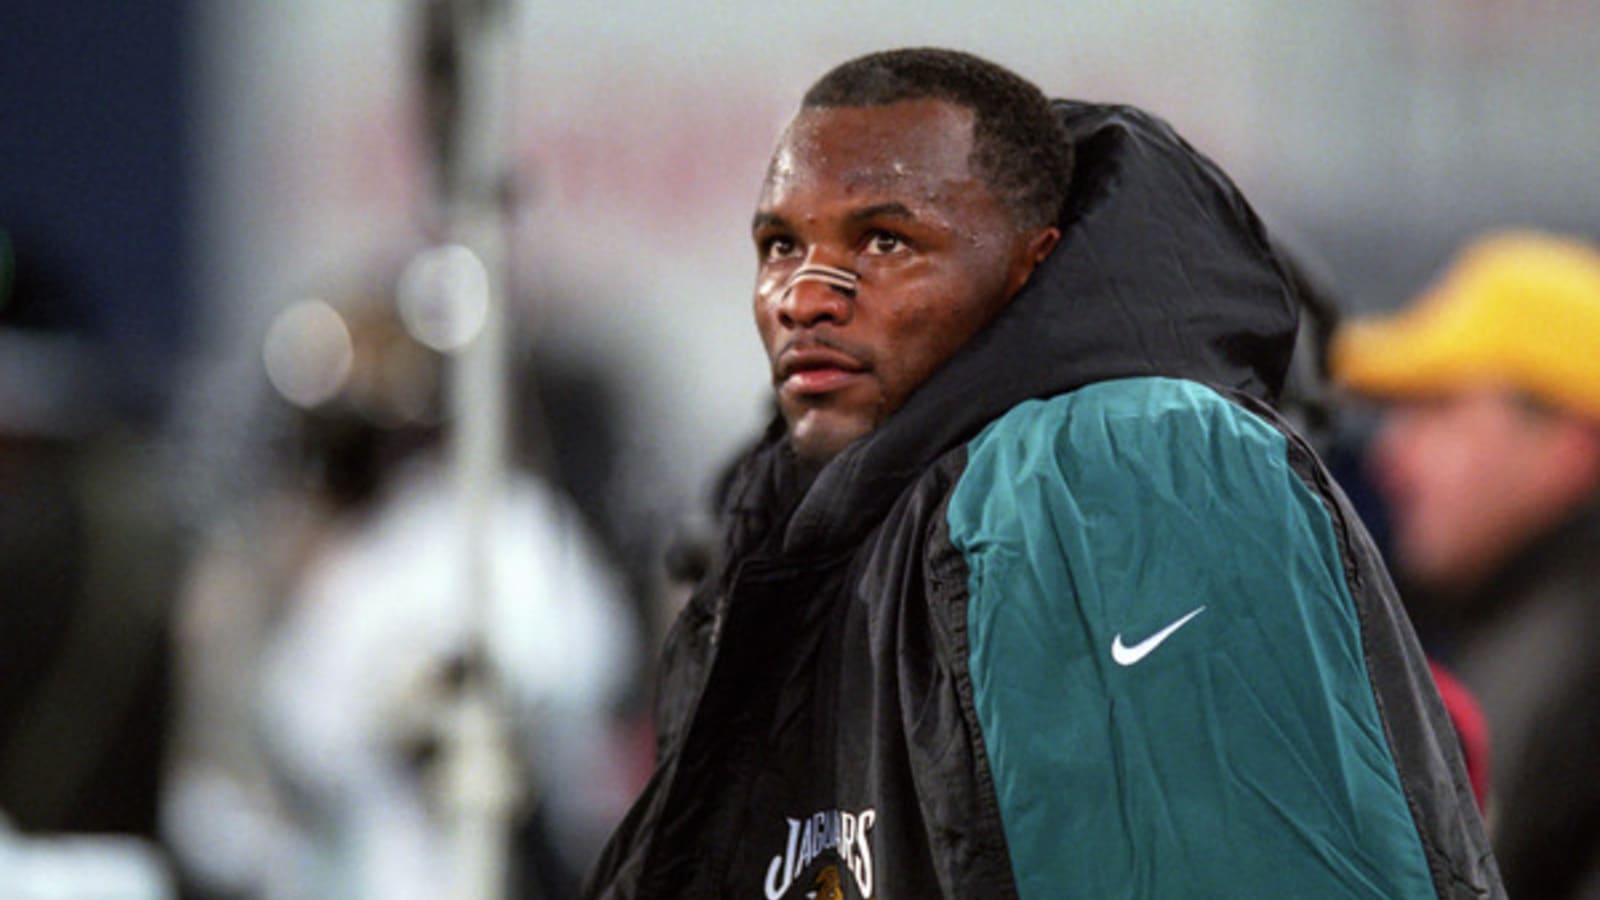 Fred Taylor clarifies Twitter rant over injuries from NFL career